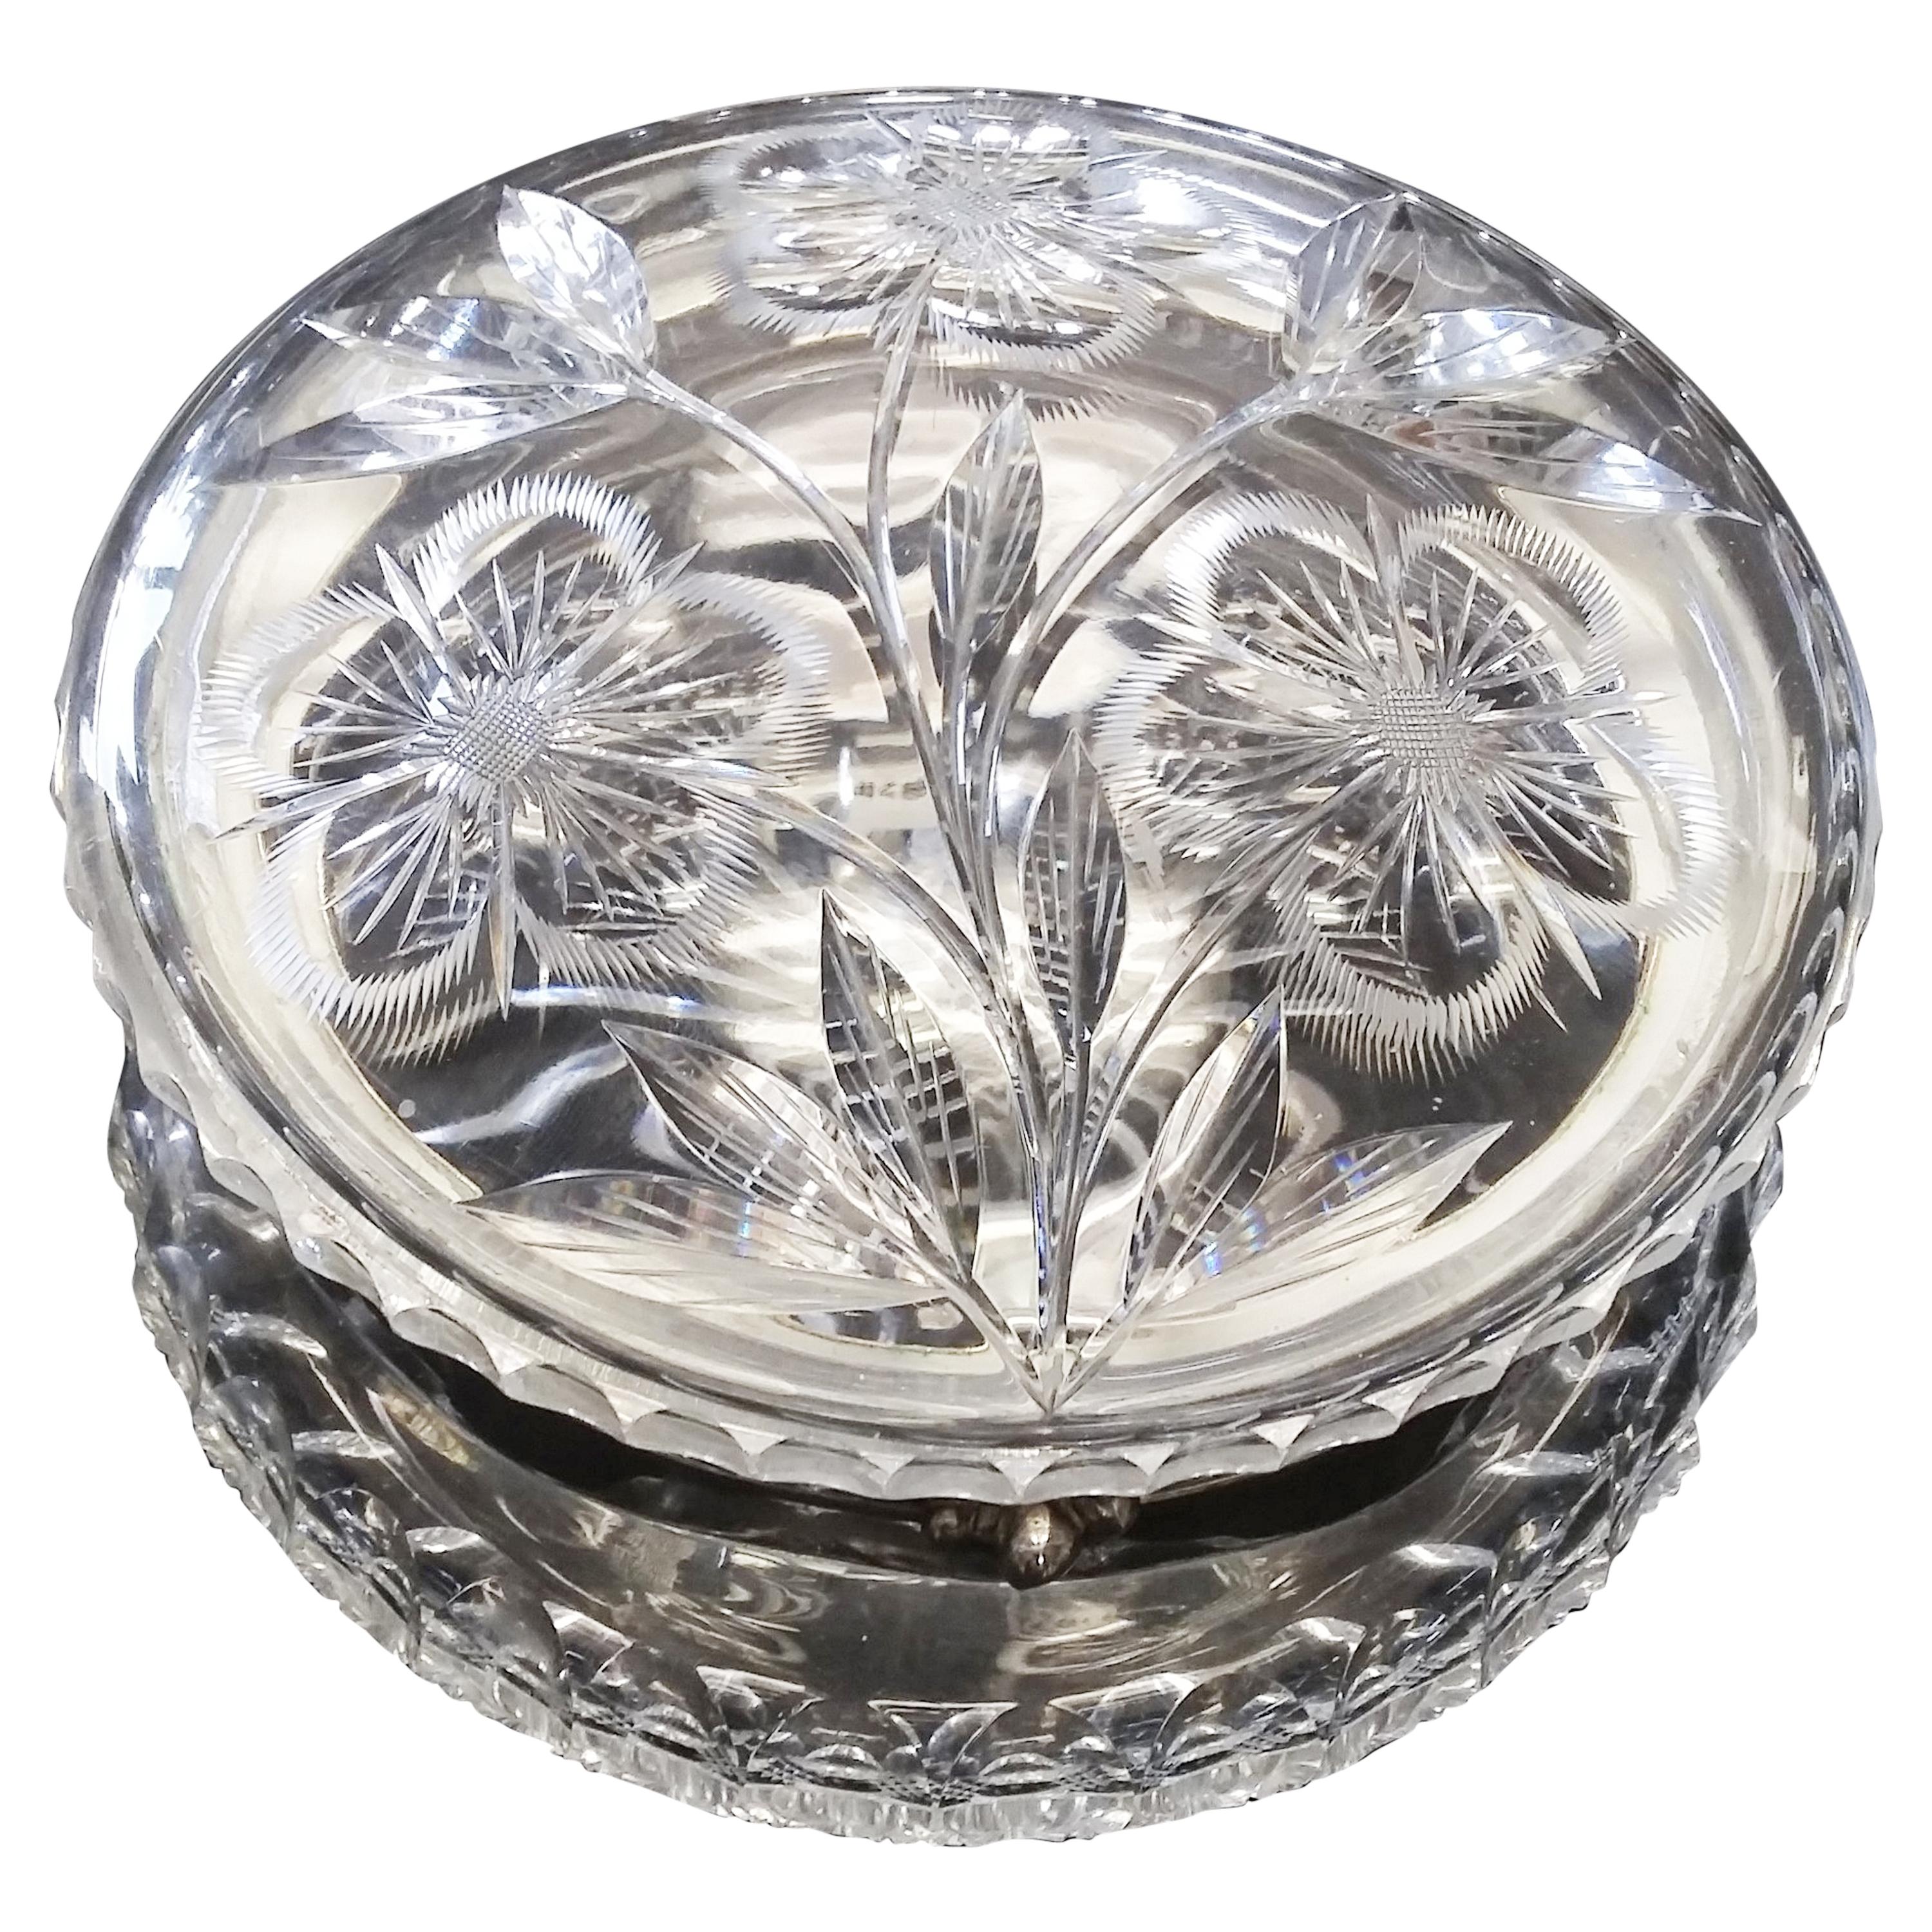 Round cut Crystal Box antique 19th century attributed to Pairpoint Mfg Co.